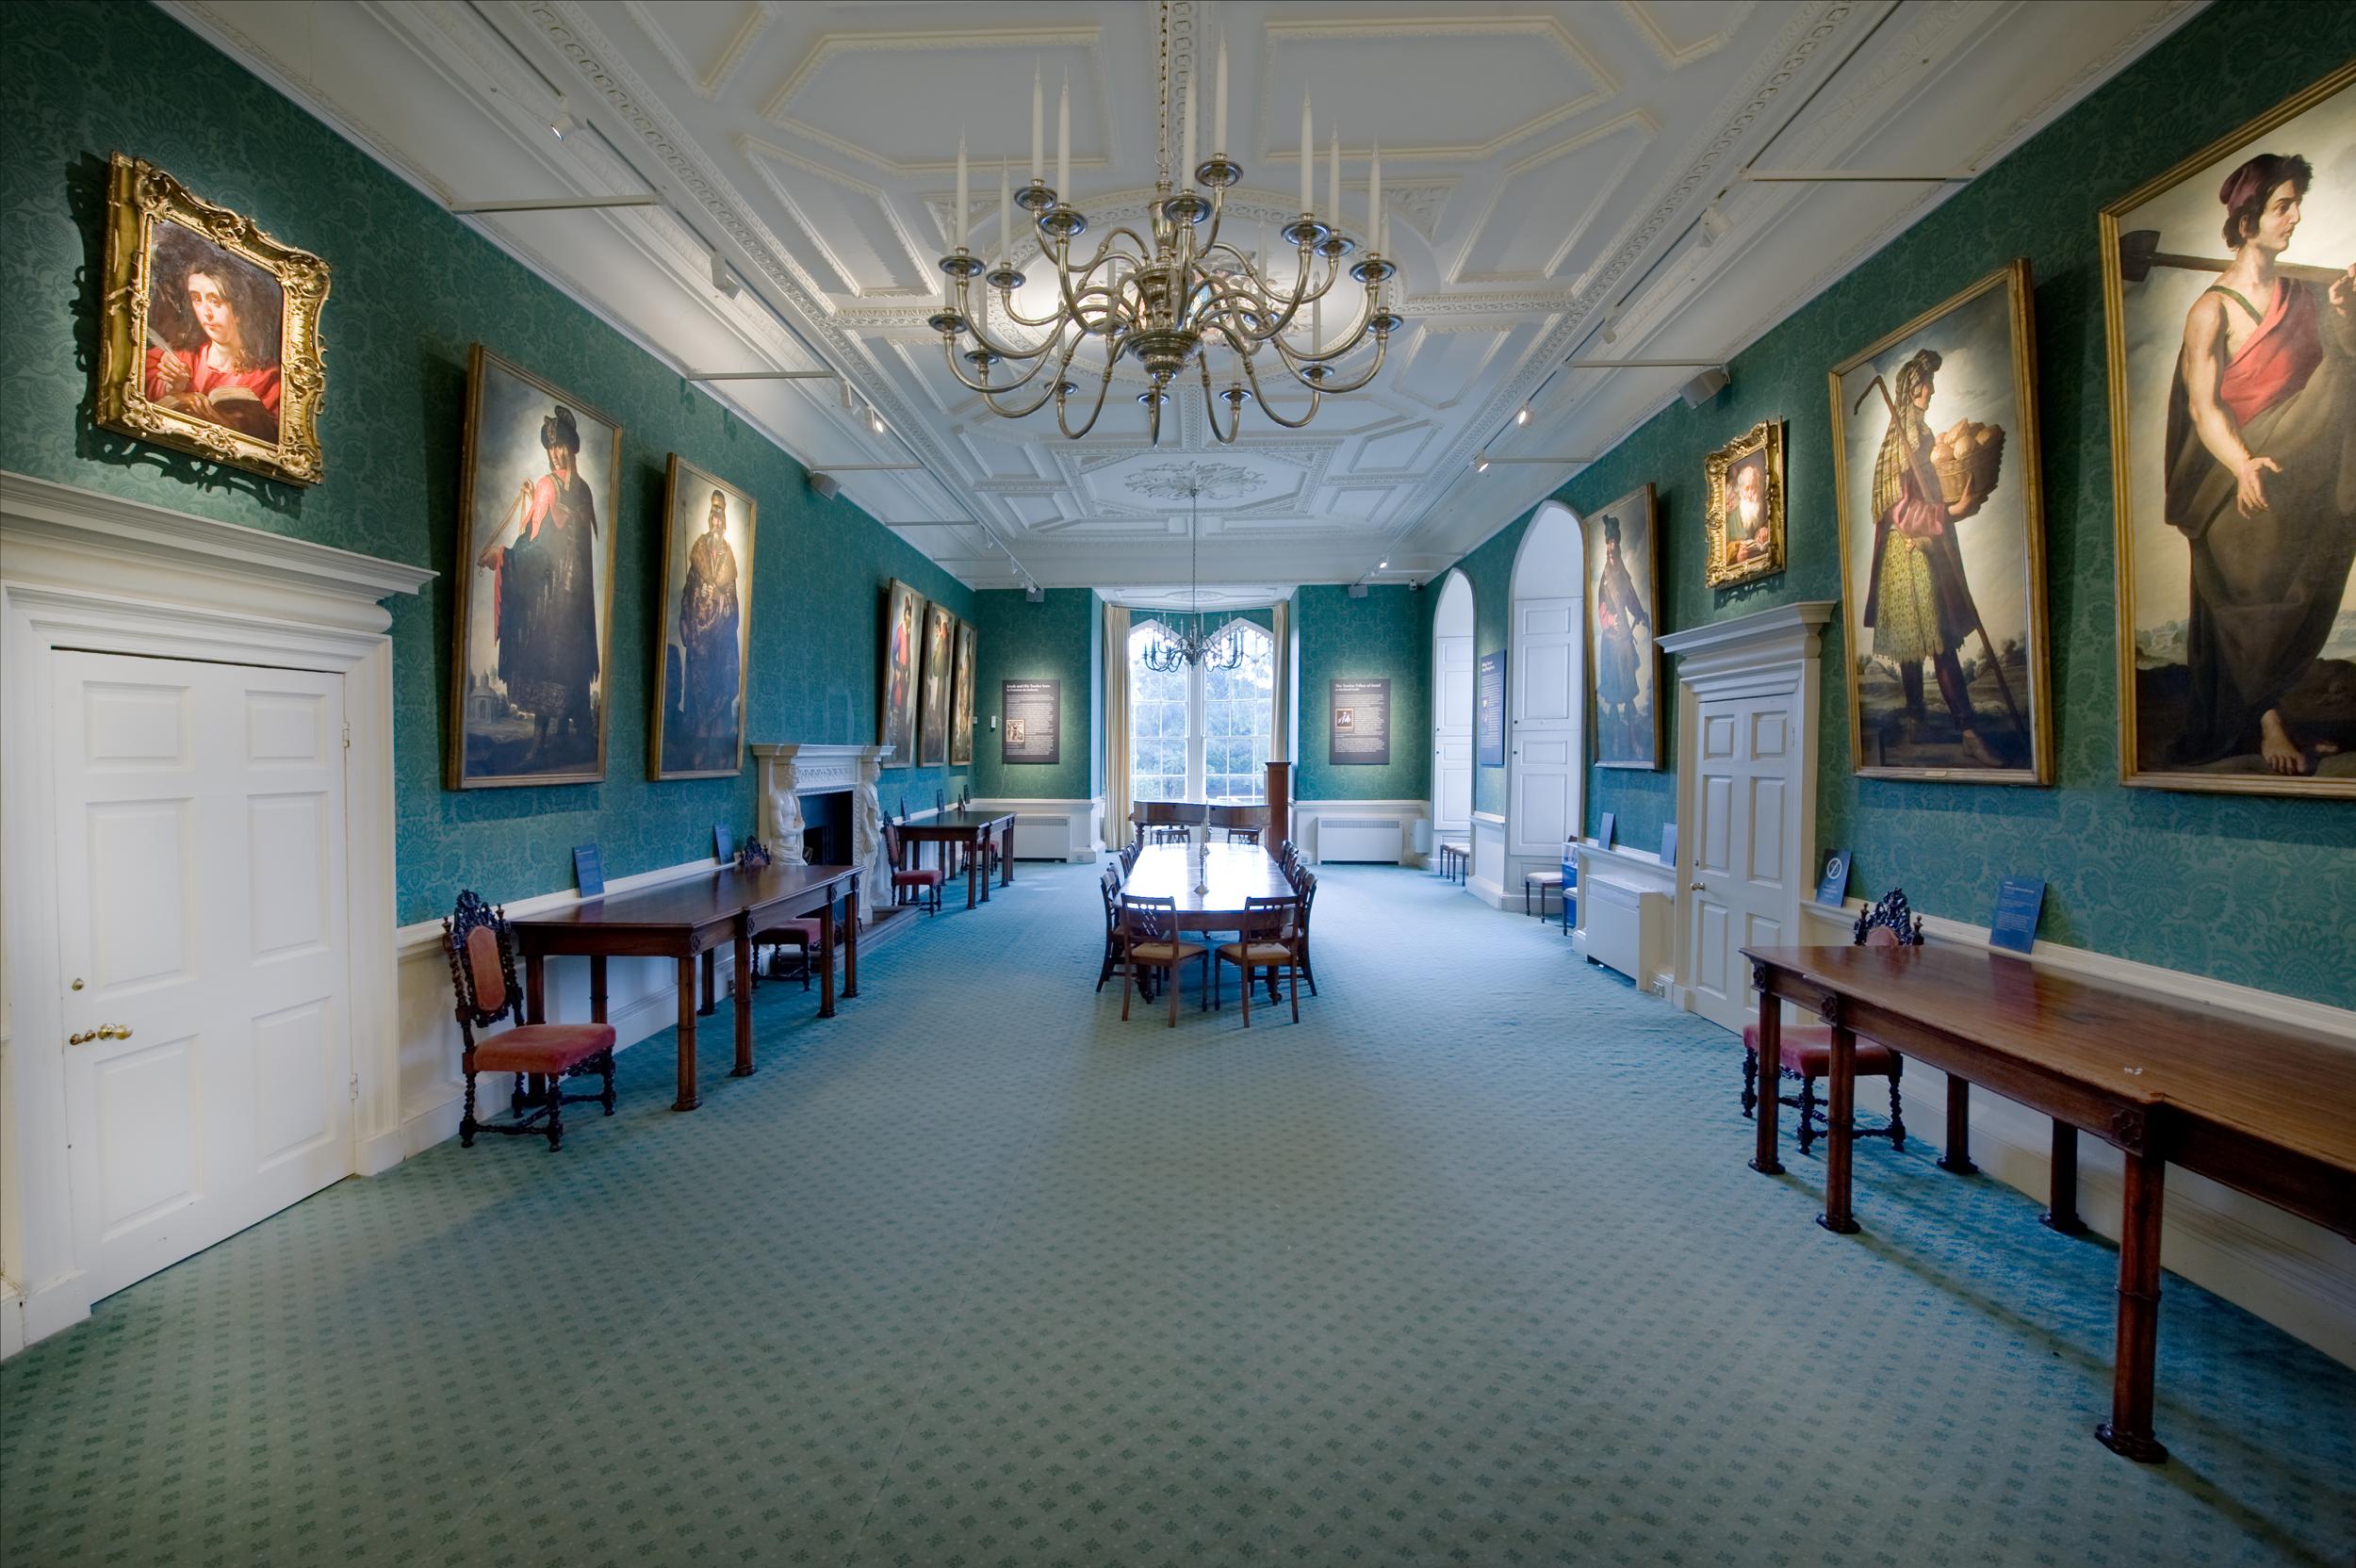 Wall to wall: art is displayed in the long dining room